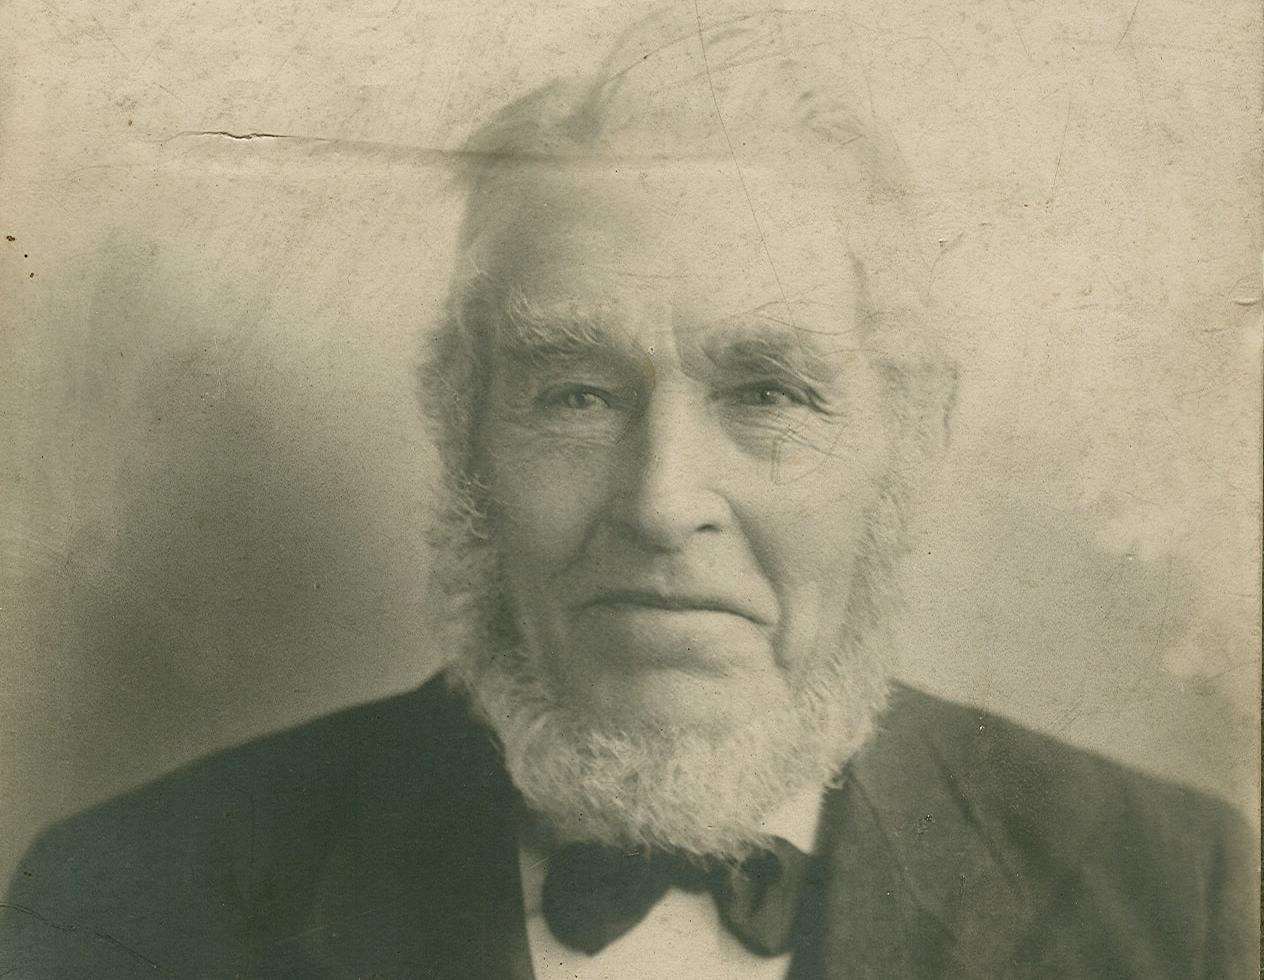 Jubilee Johnny - John Thomas Jennings Hill - who built a successful business with Medway fishmongers